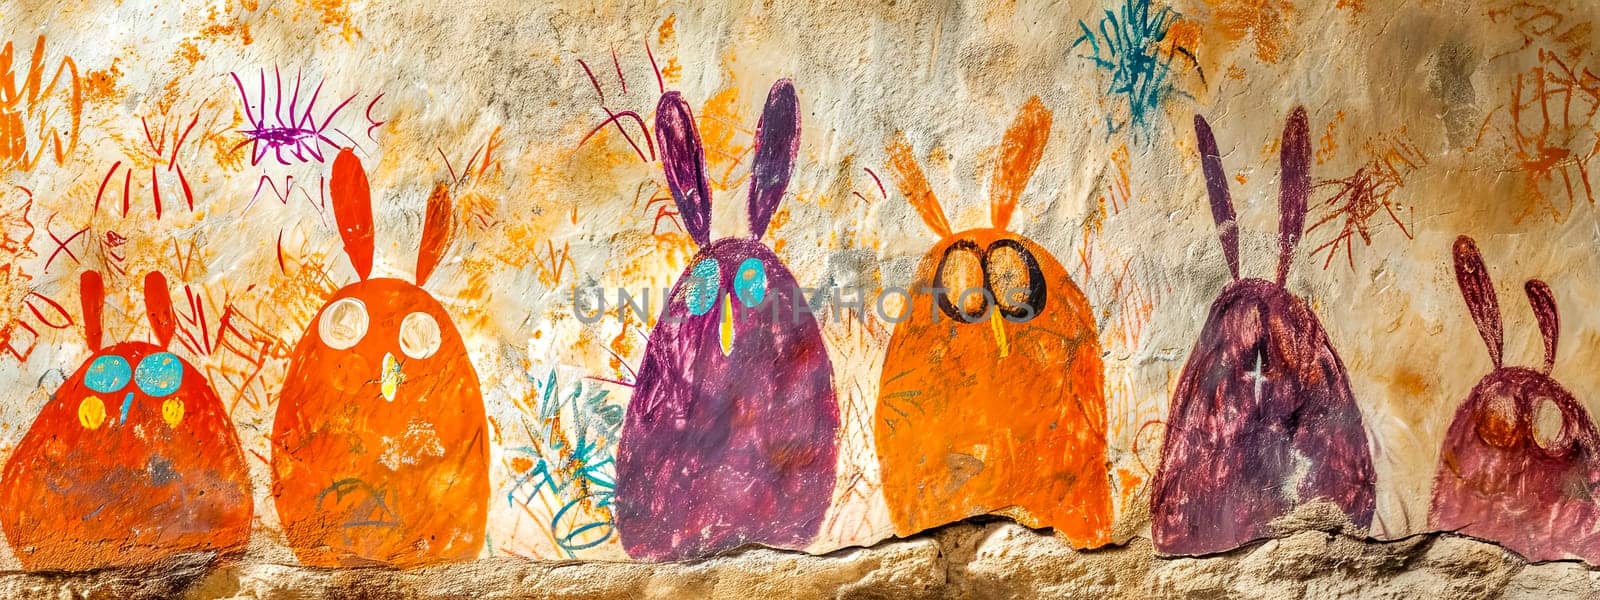 Easter, Whimsical cave painting-style illustration of colorful rabbits on a textured wall.